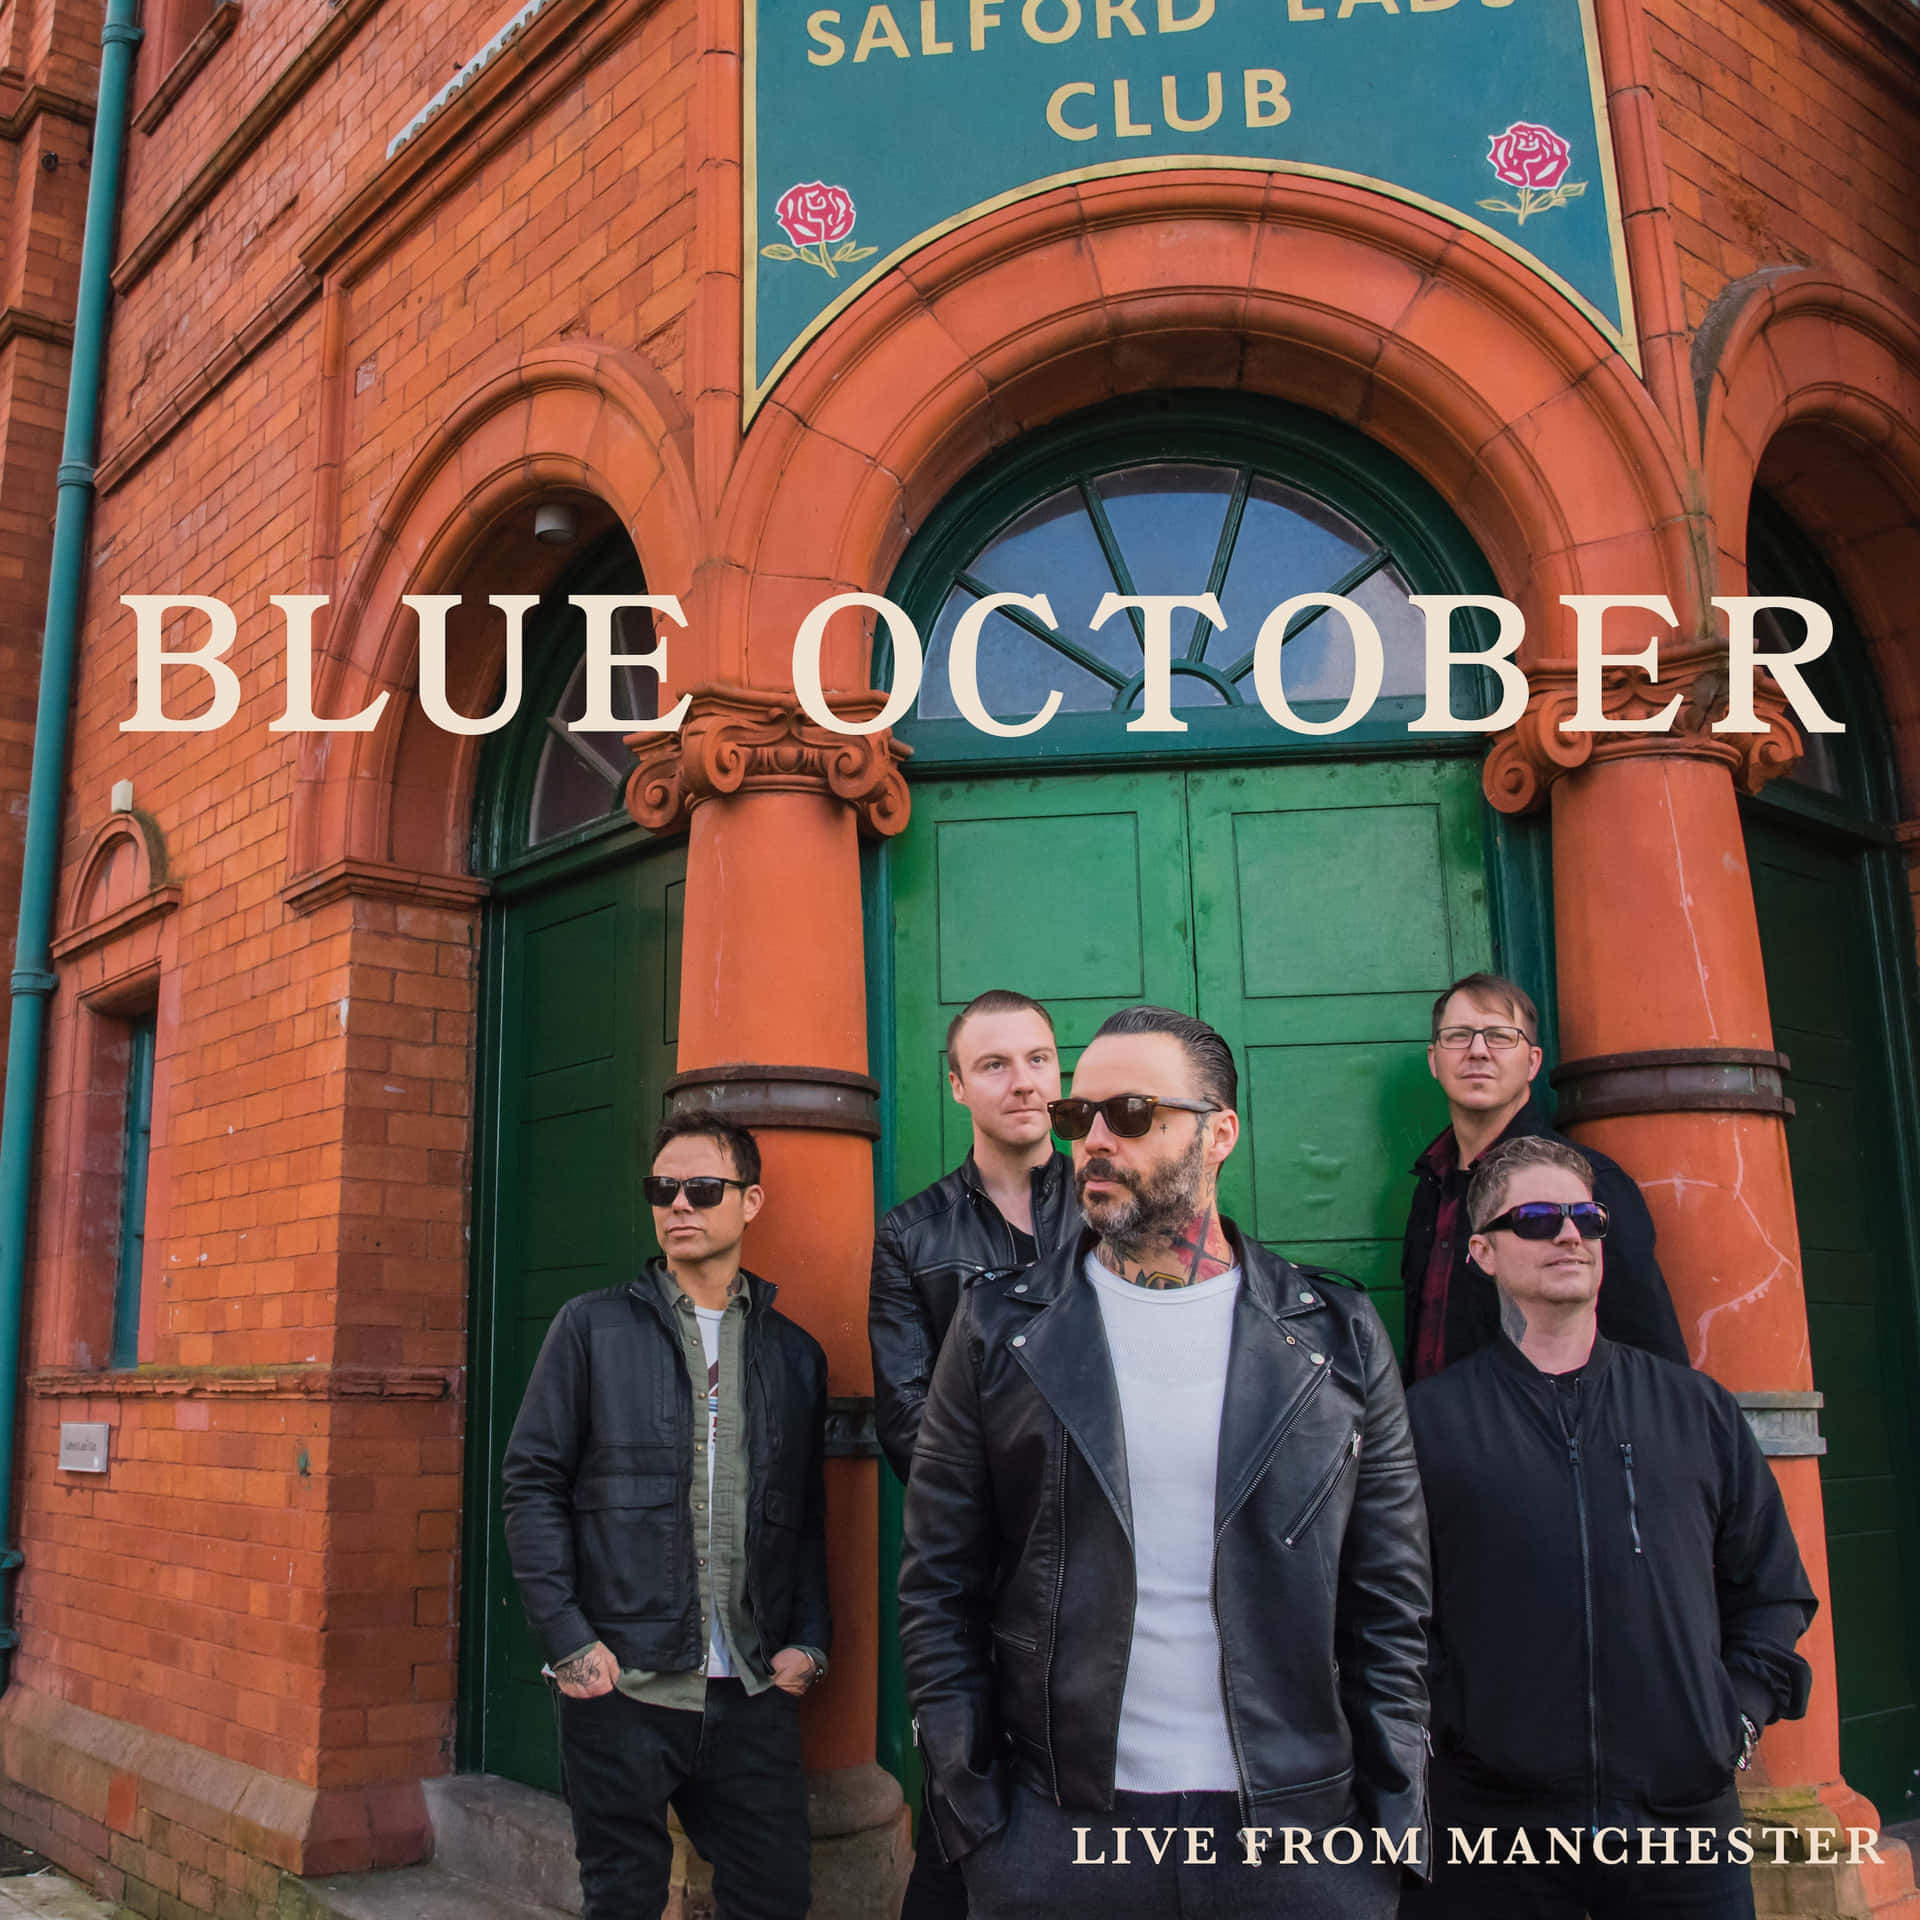 Feel the passion and emotion of Blue October with this powerful artwork Wallpaper